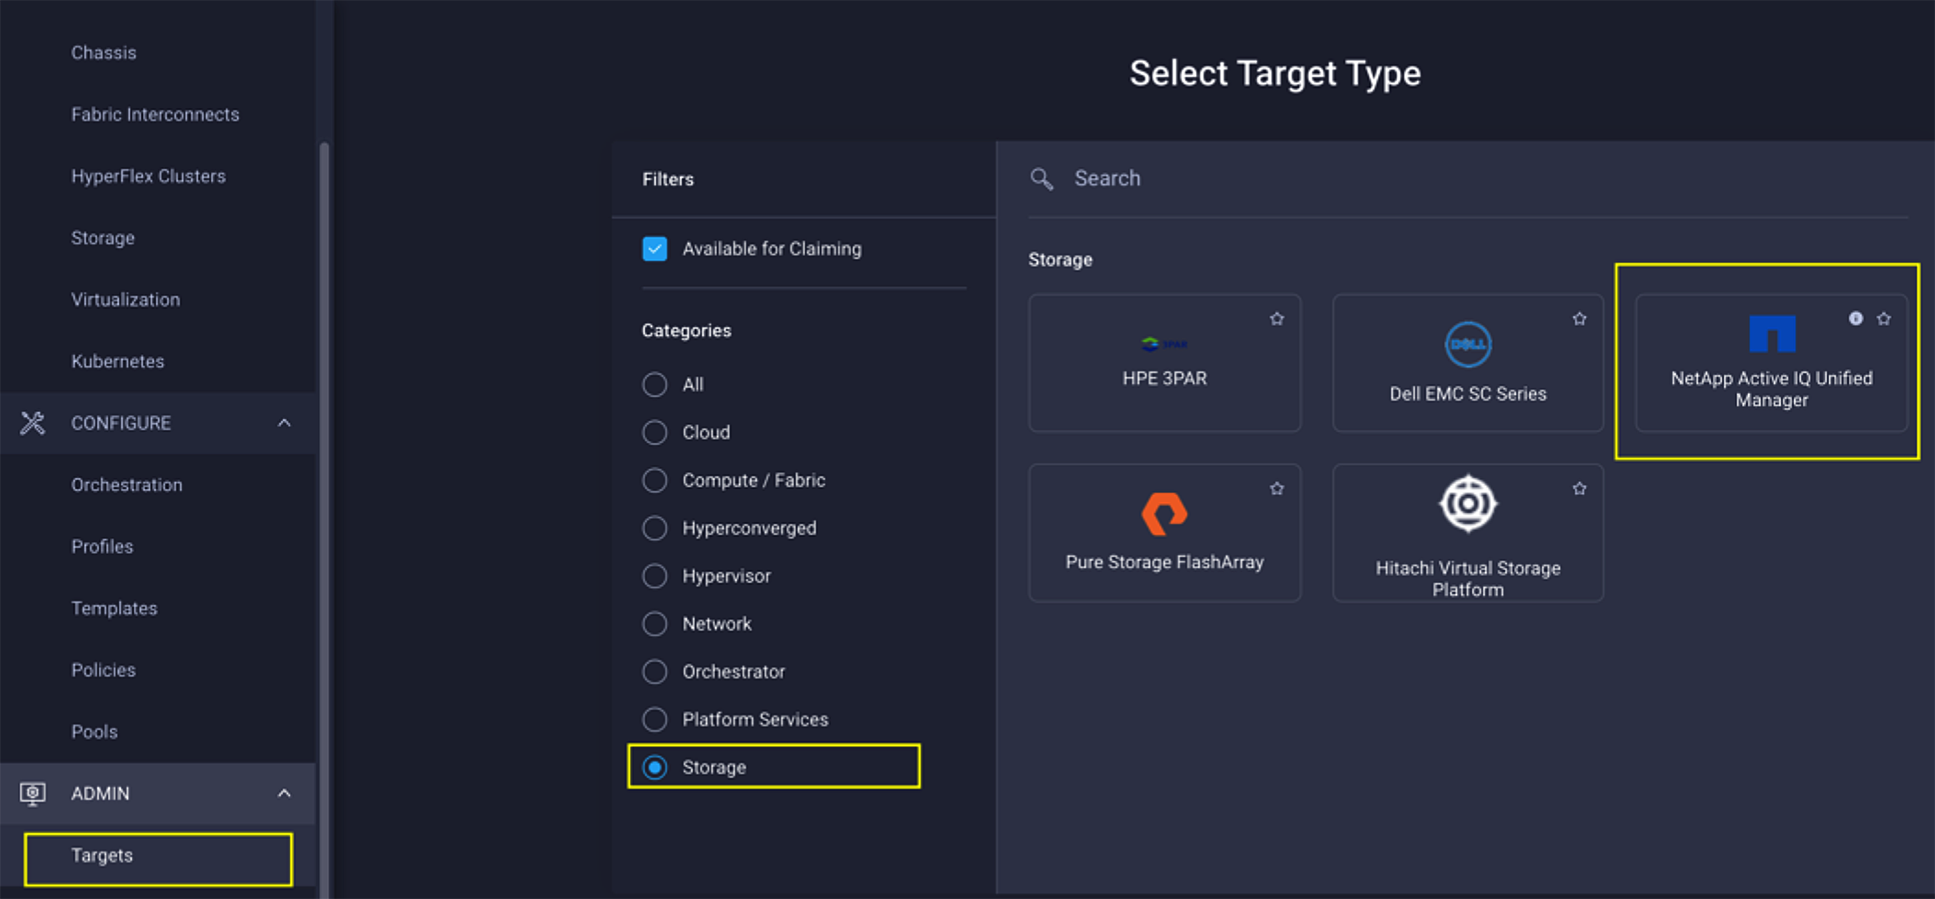 Claiming NetApp Active IQ Unified Manager as a target in Cisco Intersight